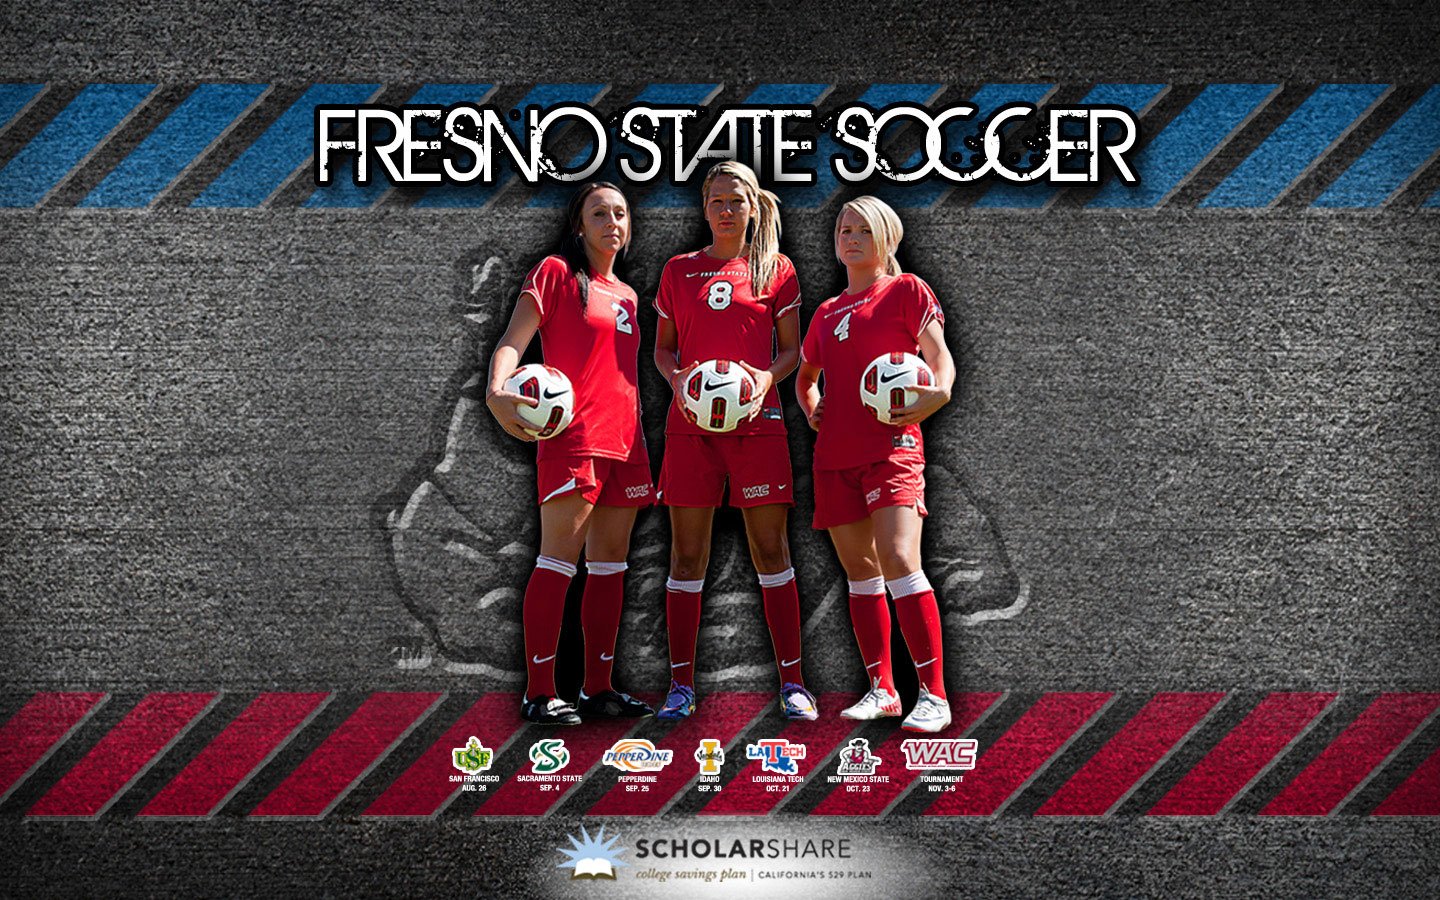 The Fresno State Official Athletic Site Official Athletic Site